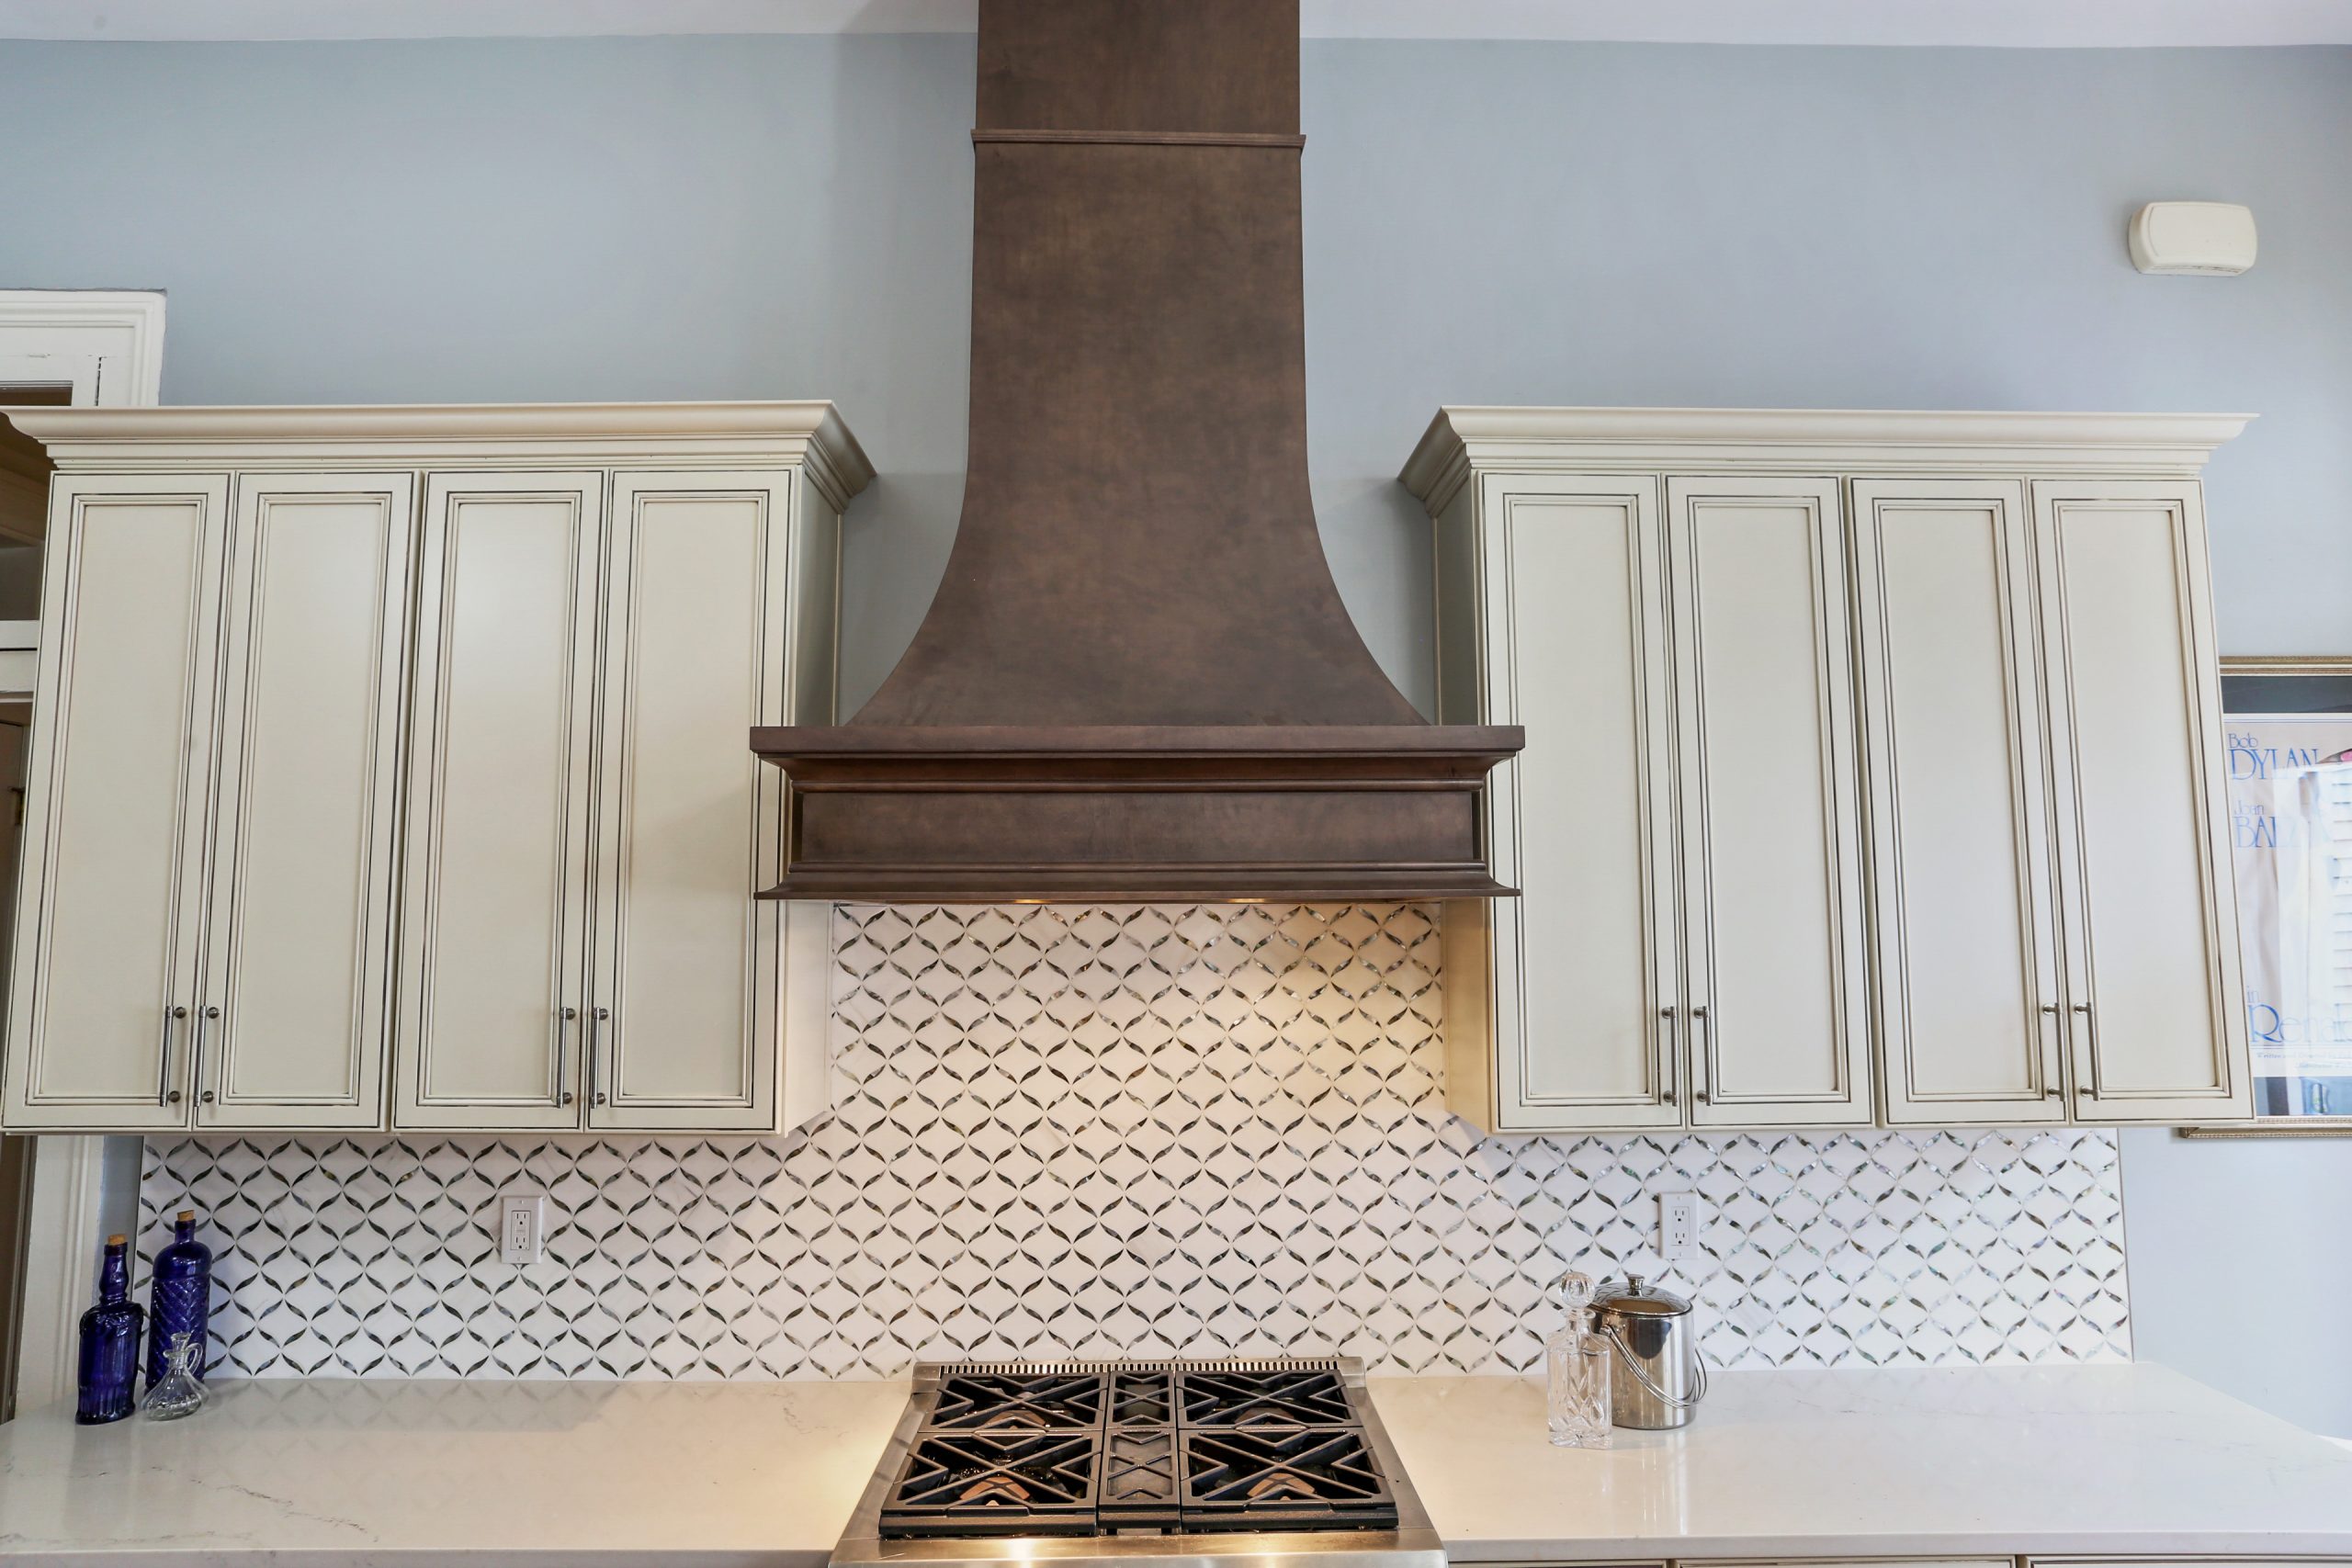 Ursulines House Luxury Historic Home Kitchen Renovation designed and built by DMG Design+Build